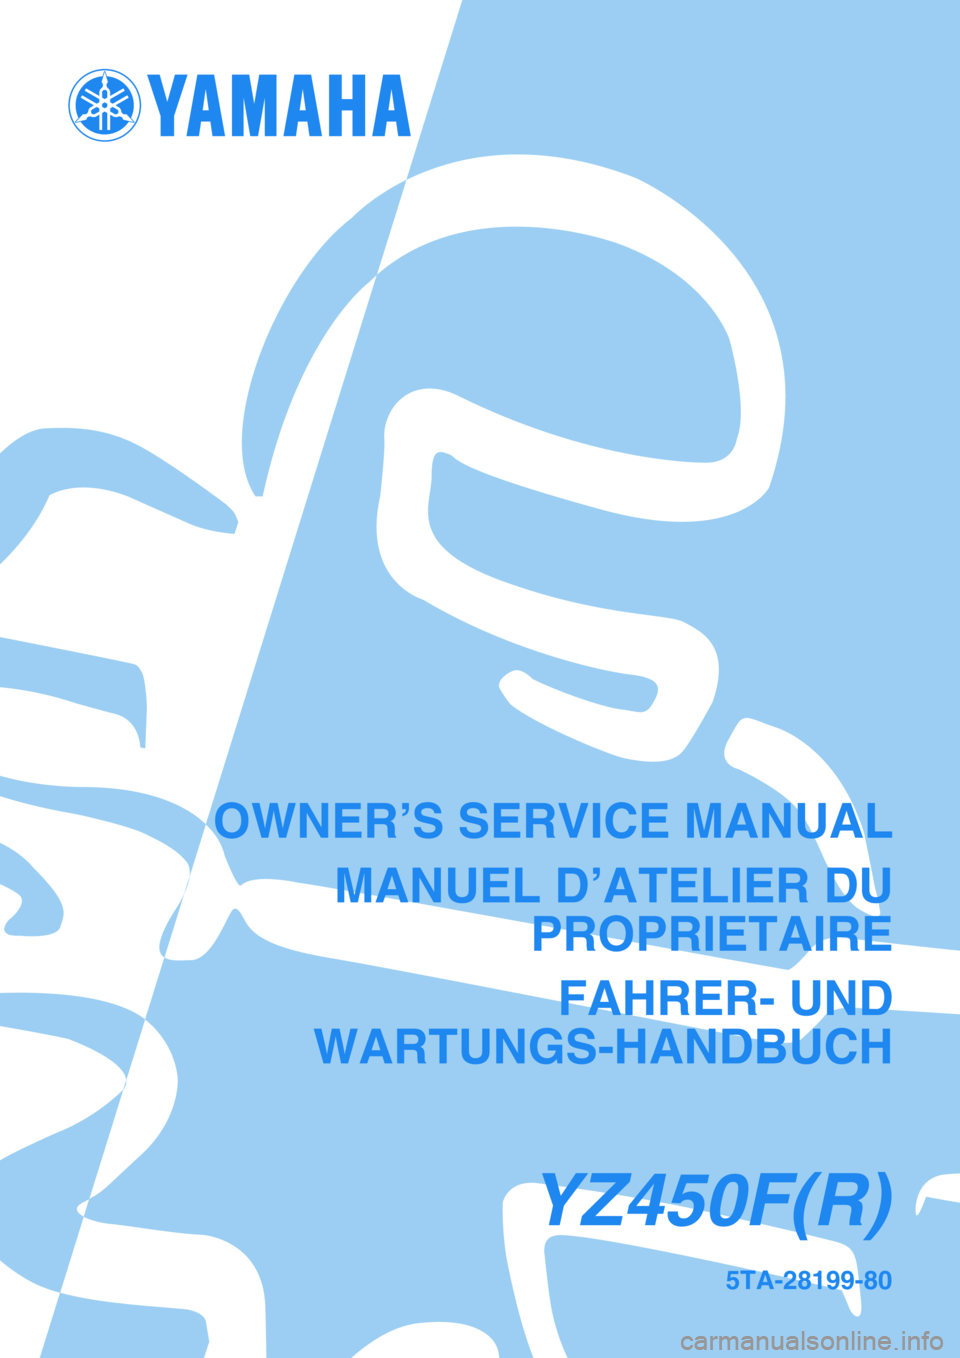 YAMAHA YZ450F 2003  Owners Manual 5TA-28199-80
YZ450F(R)
OWNER’S SERVICE MANUAL
MANUEL D’ATELIER DU
PROPRIETAIRE
FAHRER- UND
WARTUNGS-HANDBUCH 